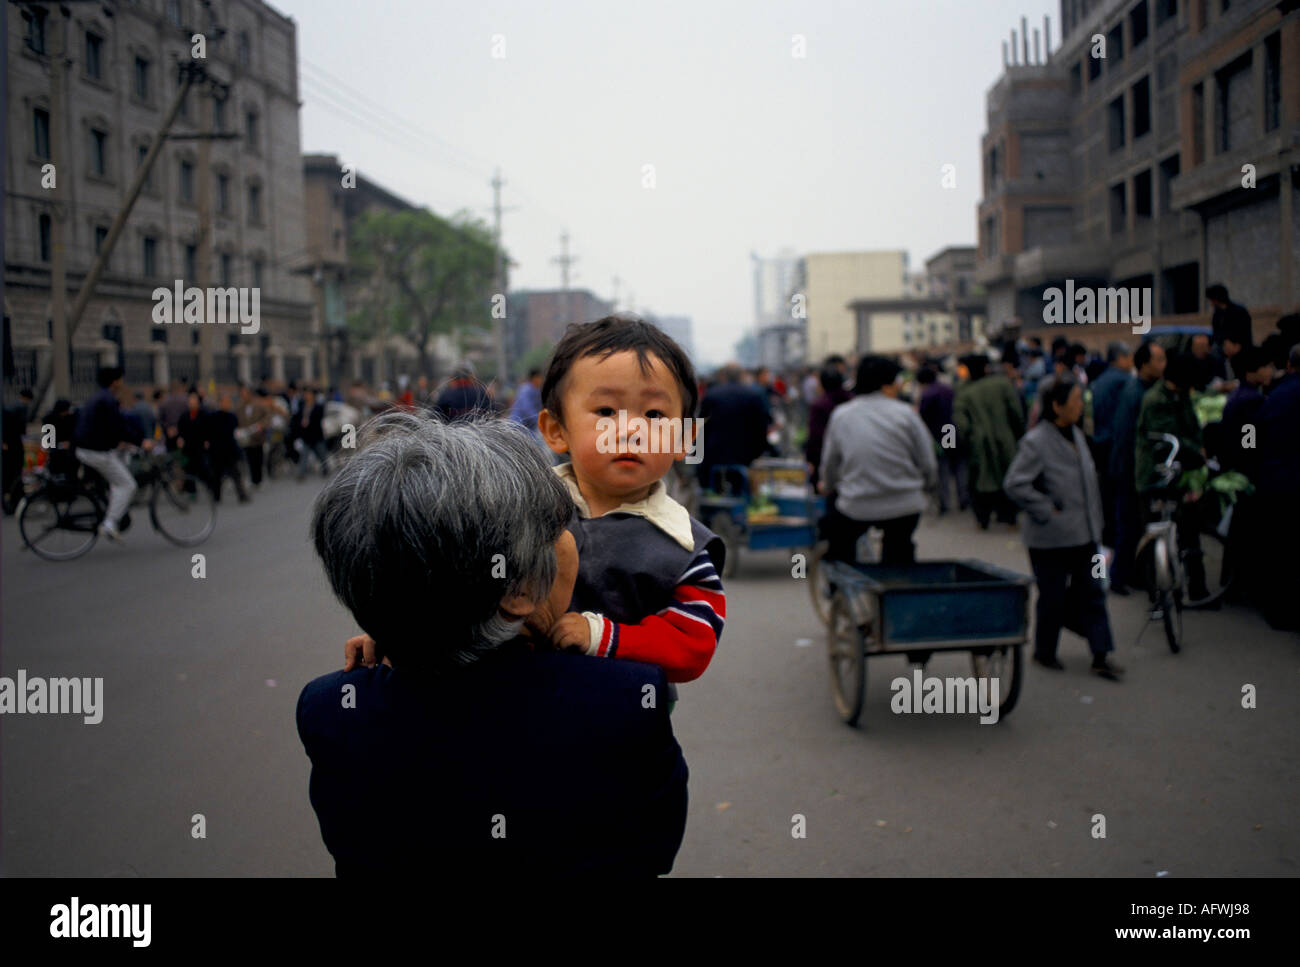 Beijing China 1998. Mother and son daily life. Child being carried through the street  by his Mom. Government One Child Policy. HOMER SYKES Stock Photo